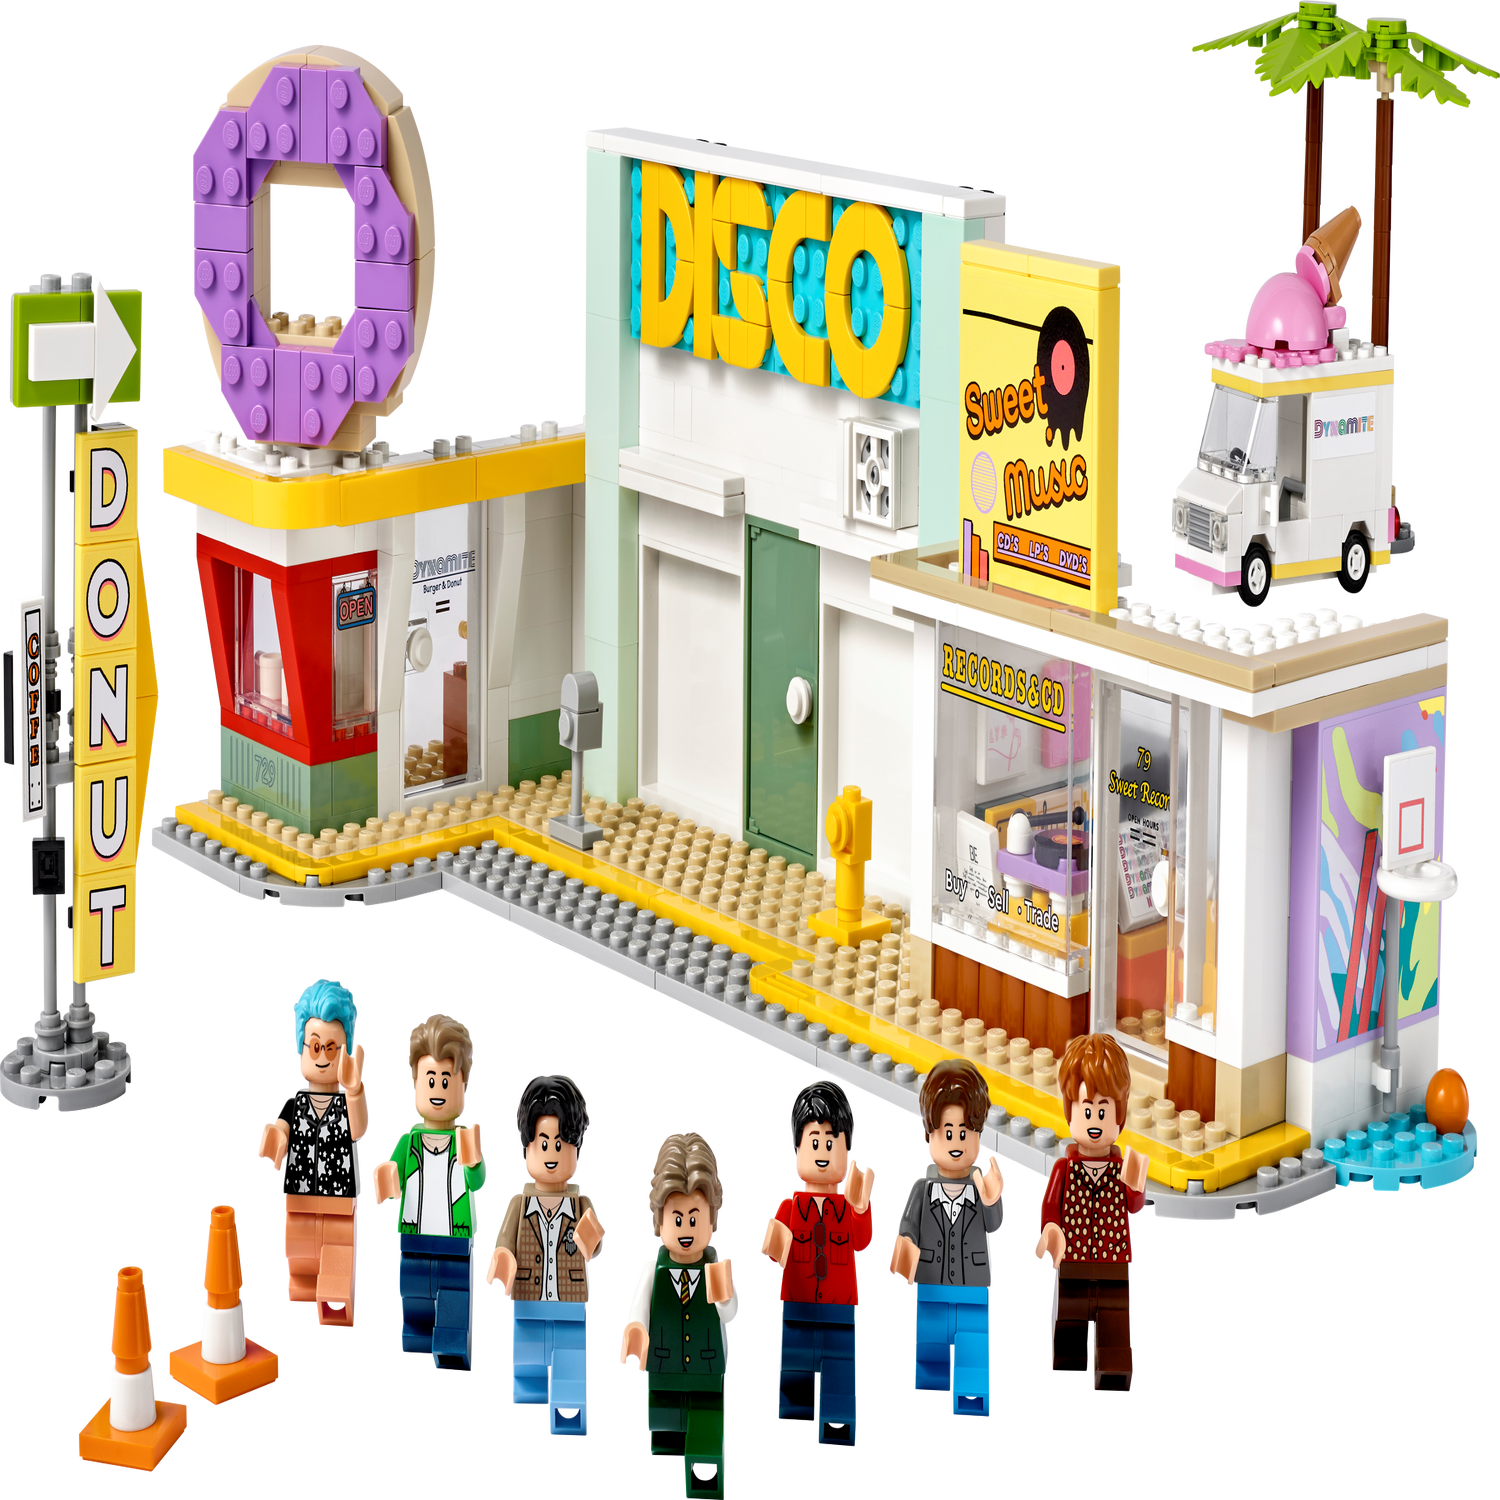 LEGO® Creator 3in1 Toys, Official LEGO® Shop US